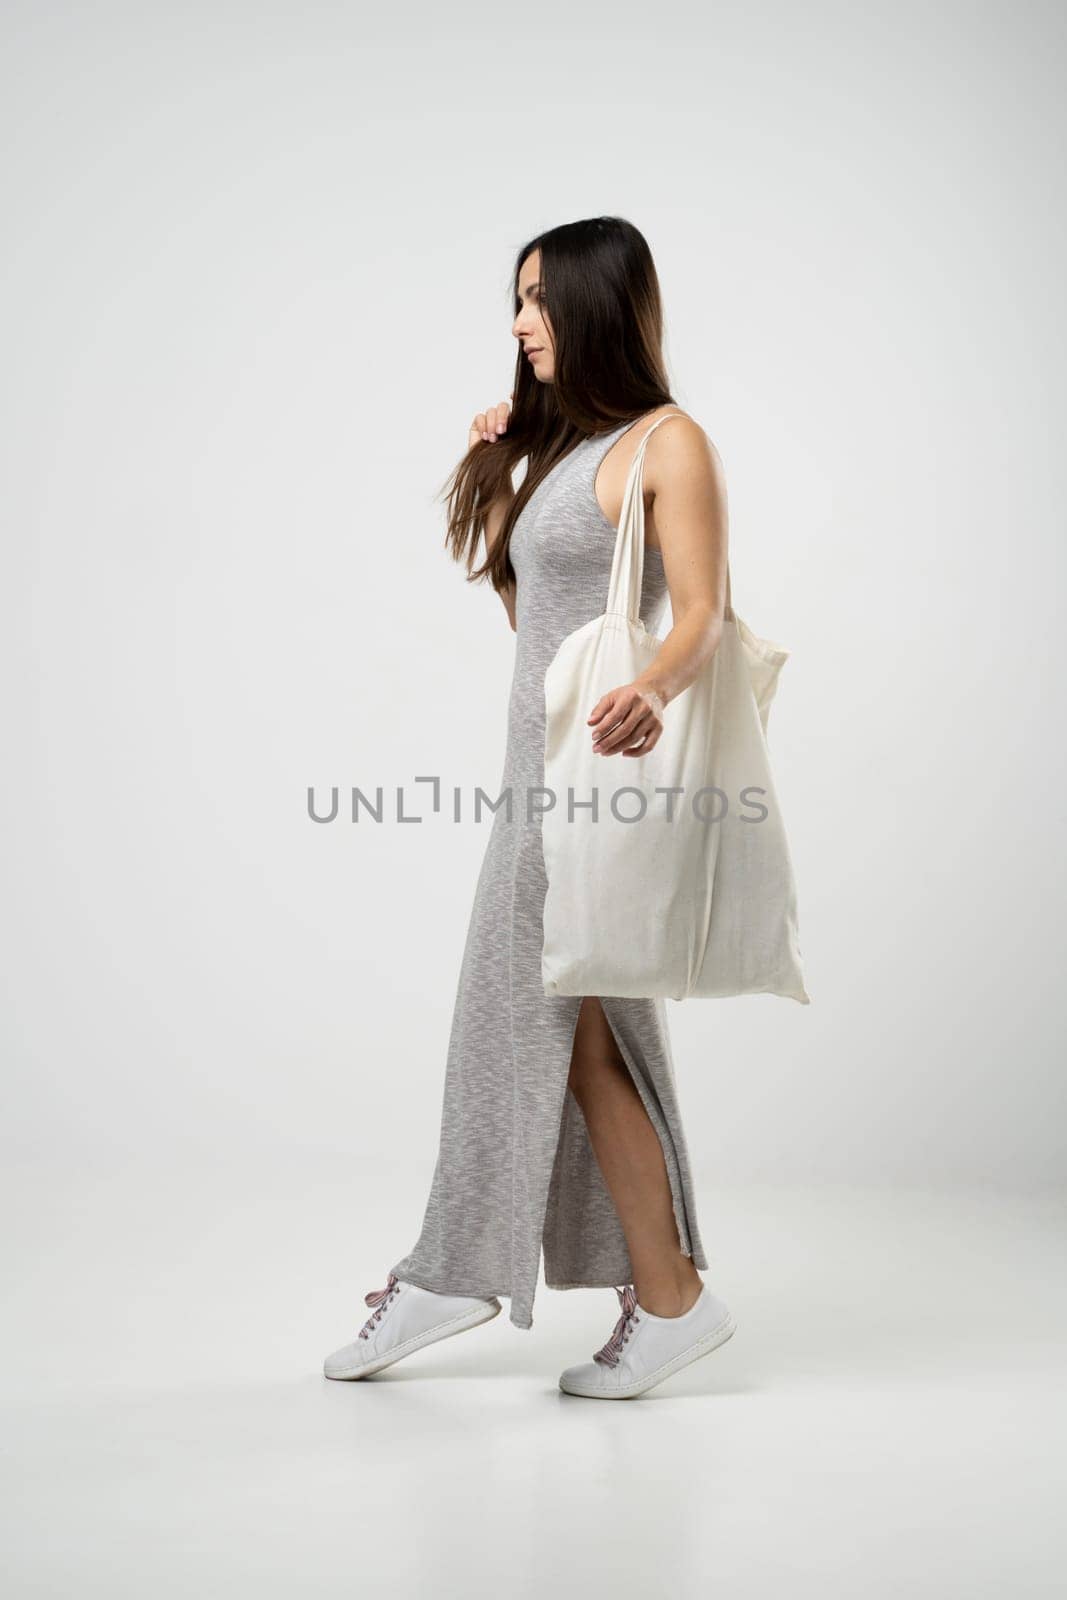 Brunette woman in grey dress holding cotton shopper bag with vegetables, products in white room. Eco friendly shopping bags. Zero waste, plastic free concept